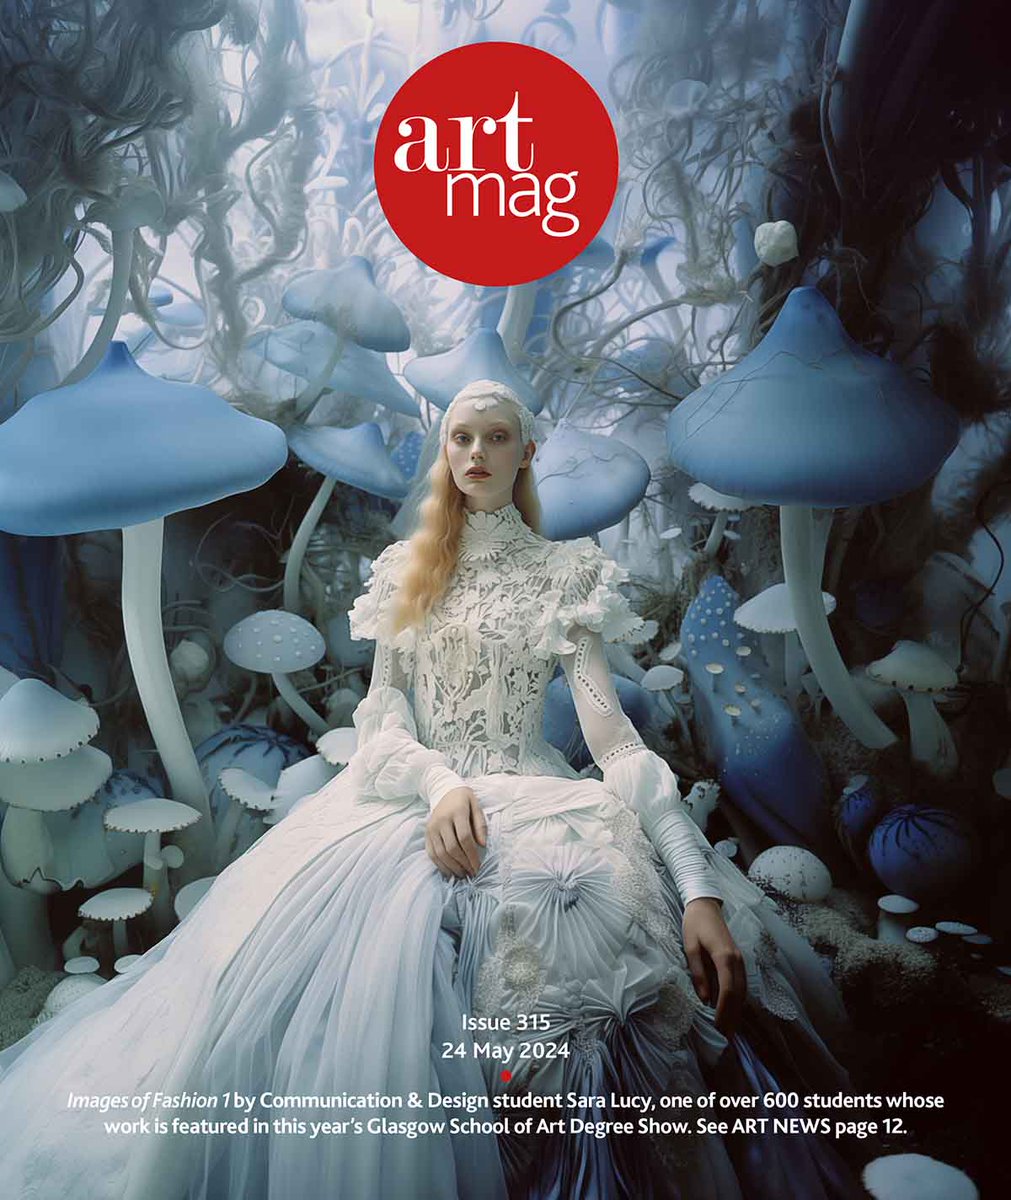 OUT NOW: the new digital edition of ARTMAG has the latest Scottish arts news. View and download it: artmag.co.uk/magazine/artma… Image Sara Lucy, @GSofA. #onlinemagazine #digitalmagazine #magazines #magazine #artmagazine #artmagazines #artmaguk #artmags